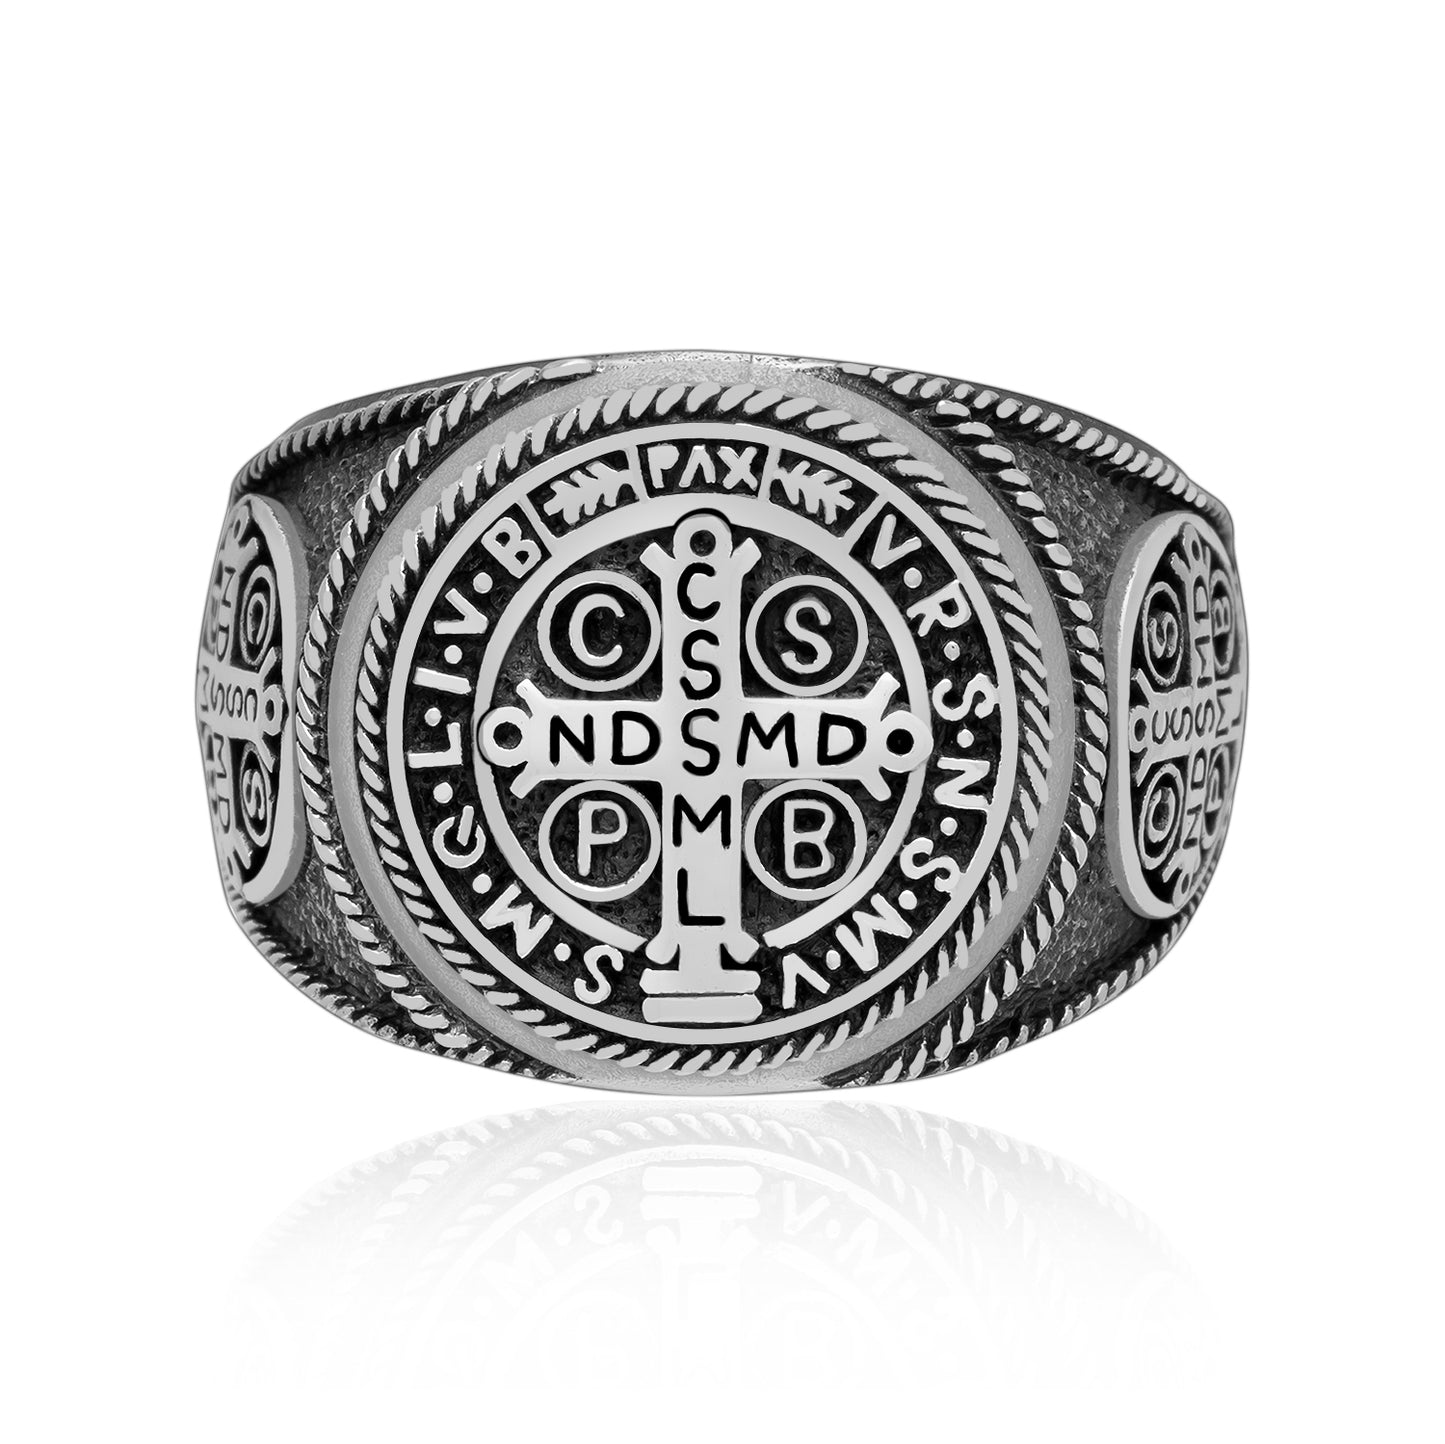 925 Sterling Silver Saint Benedict Medal Ring